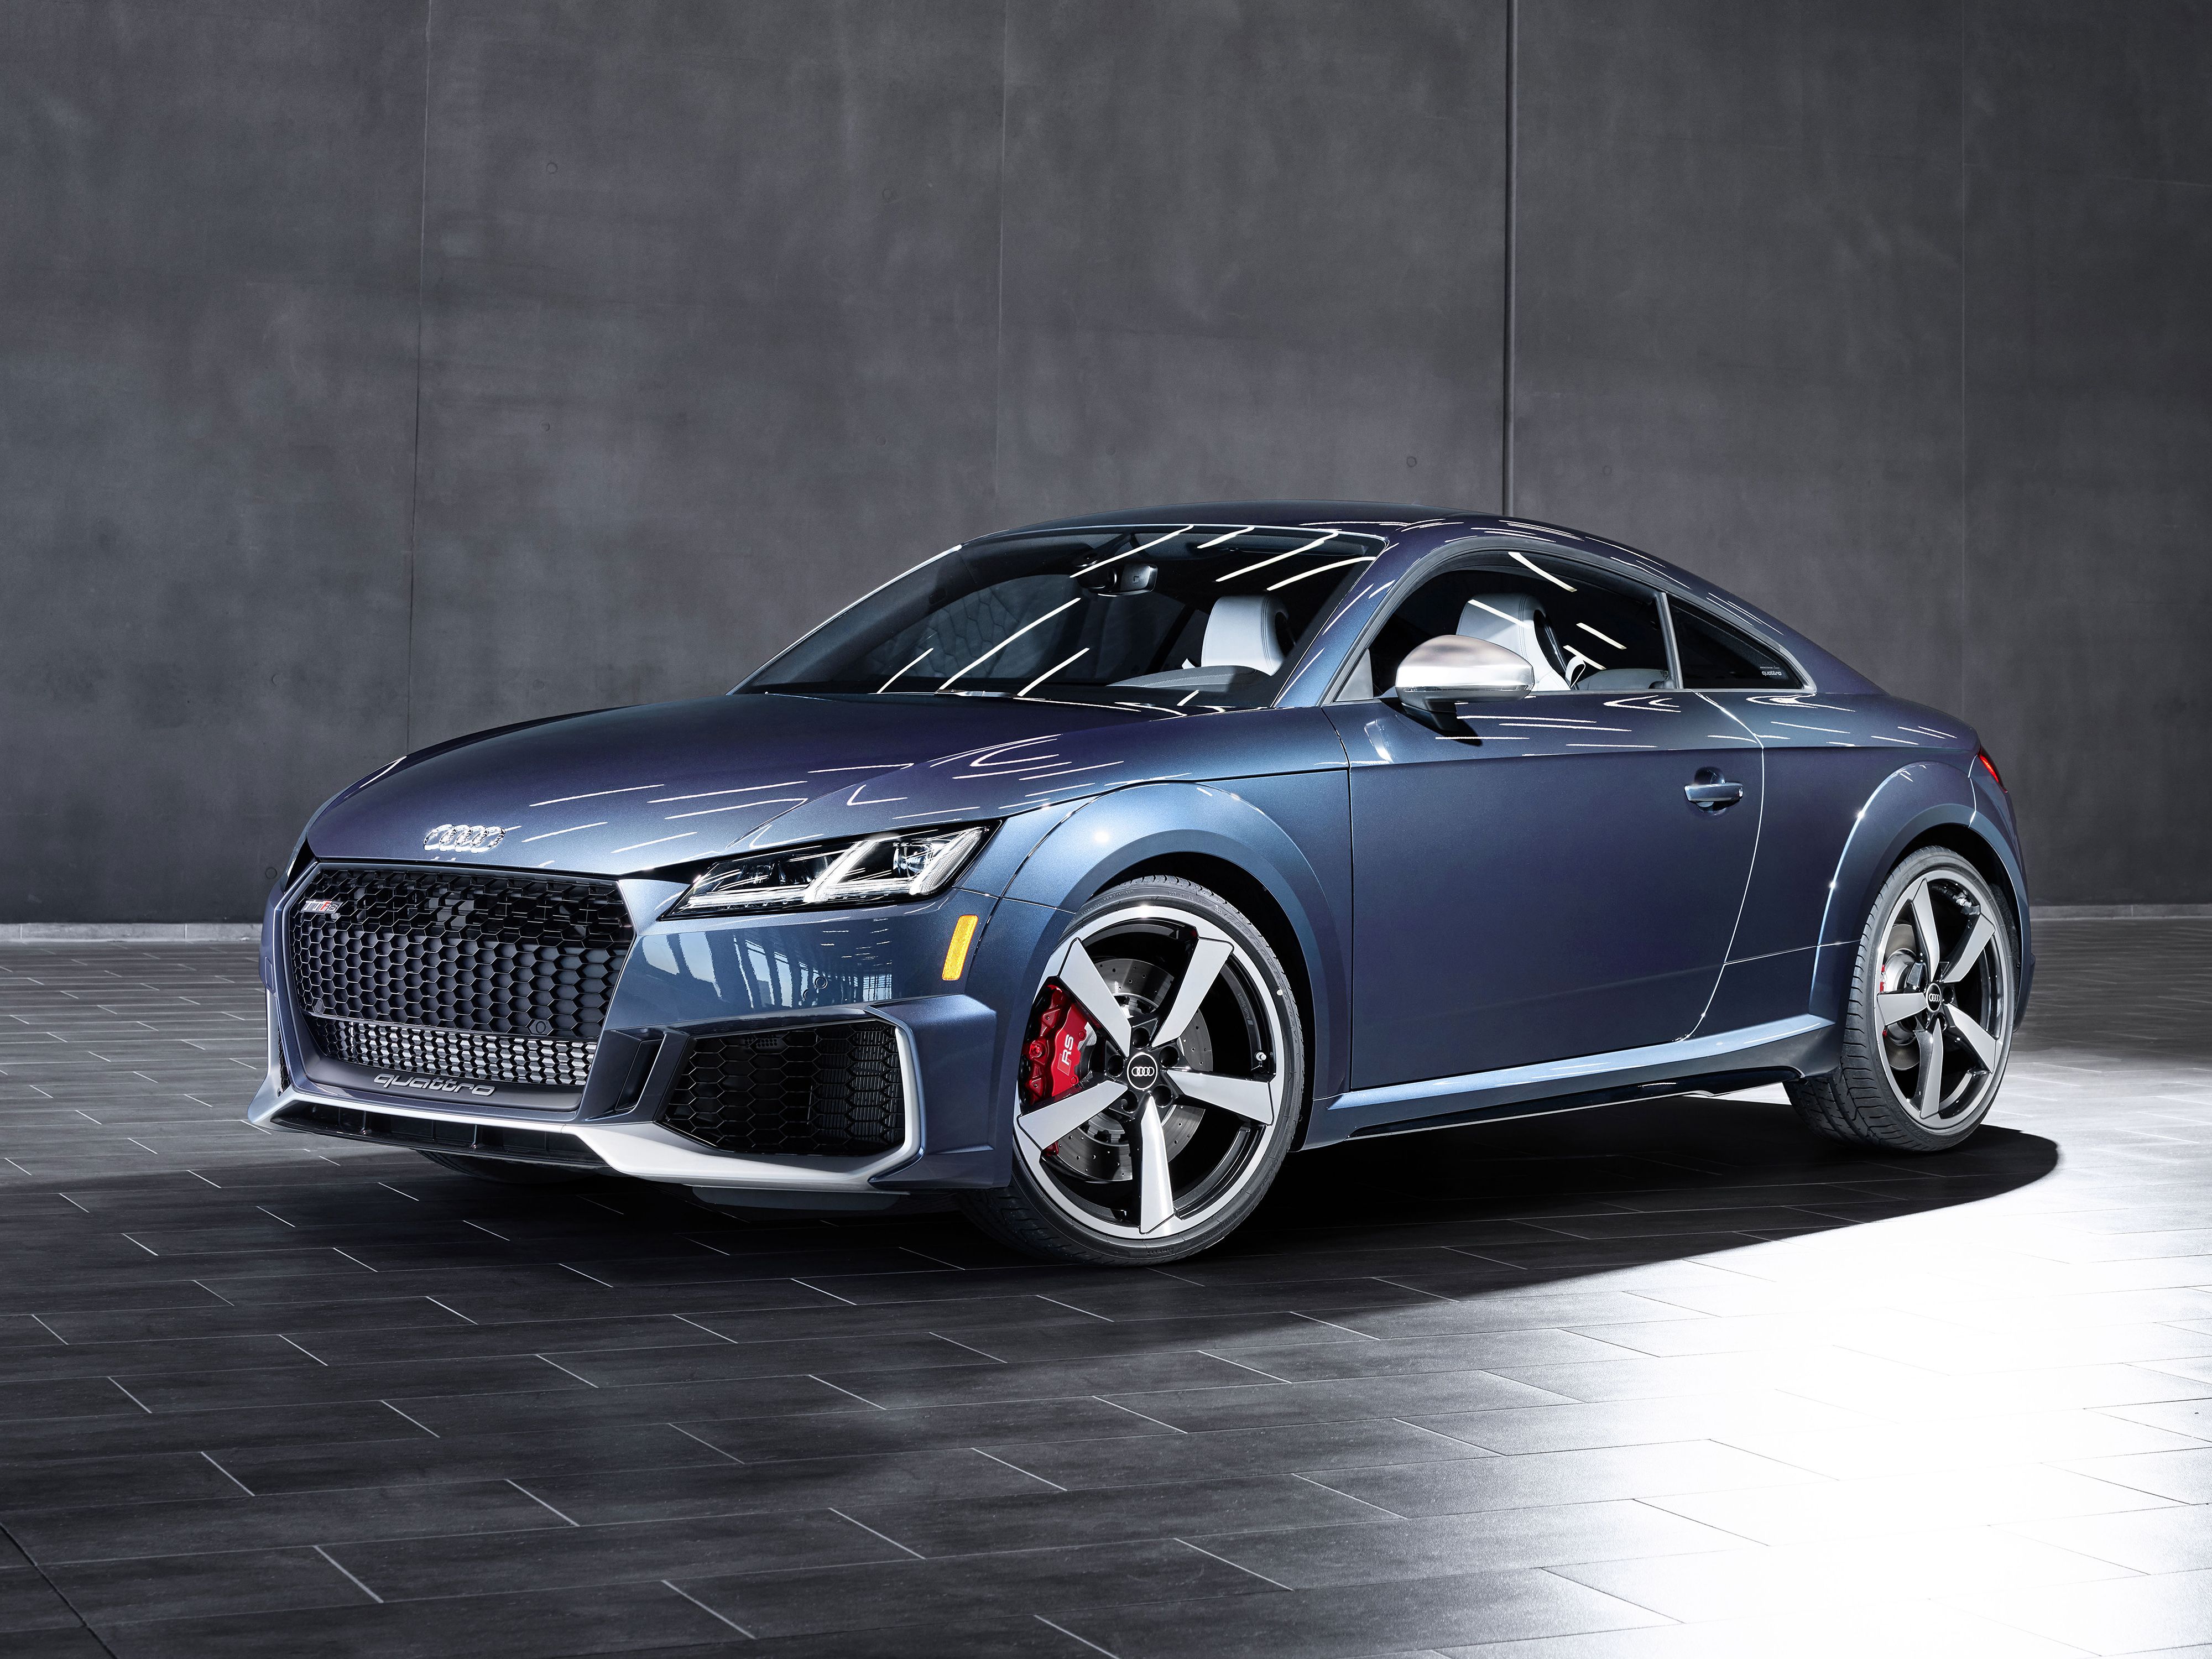 Rsxxxx - 2022 Audi TT RS Review, Pricing, and Specs